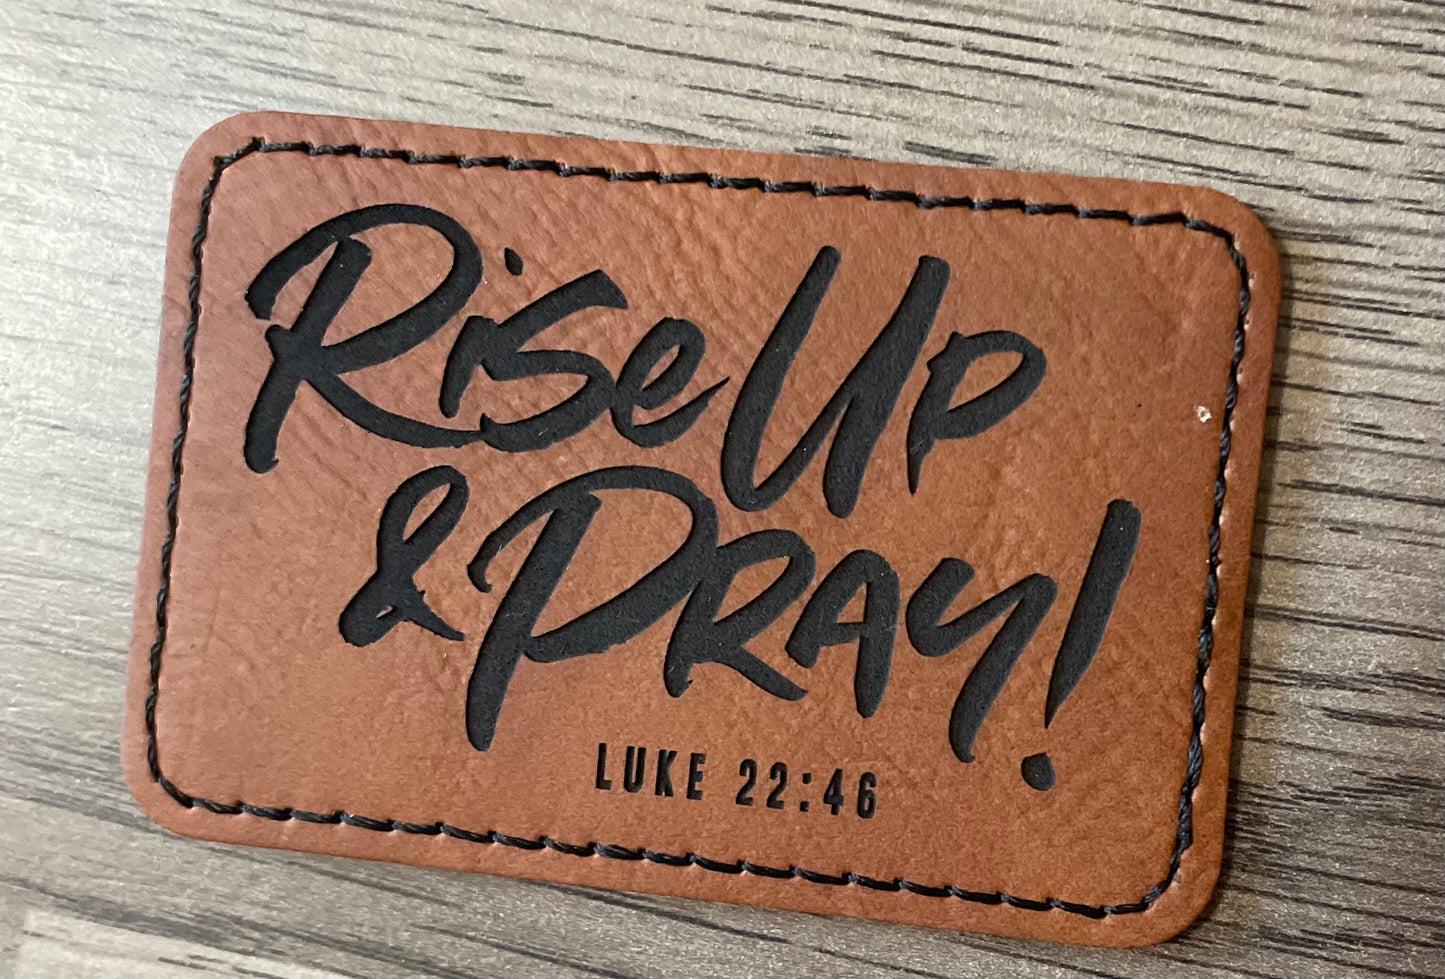 Rise up & pray leather patch